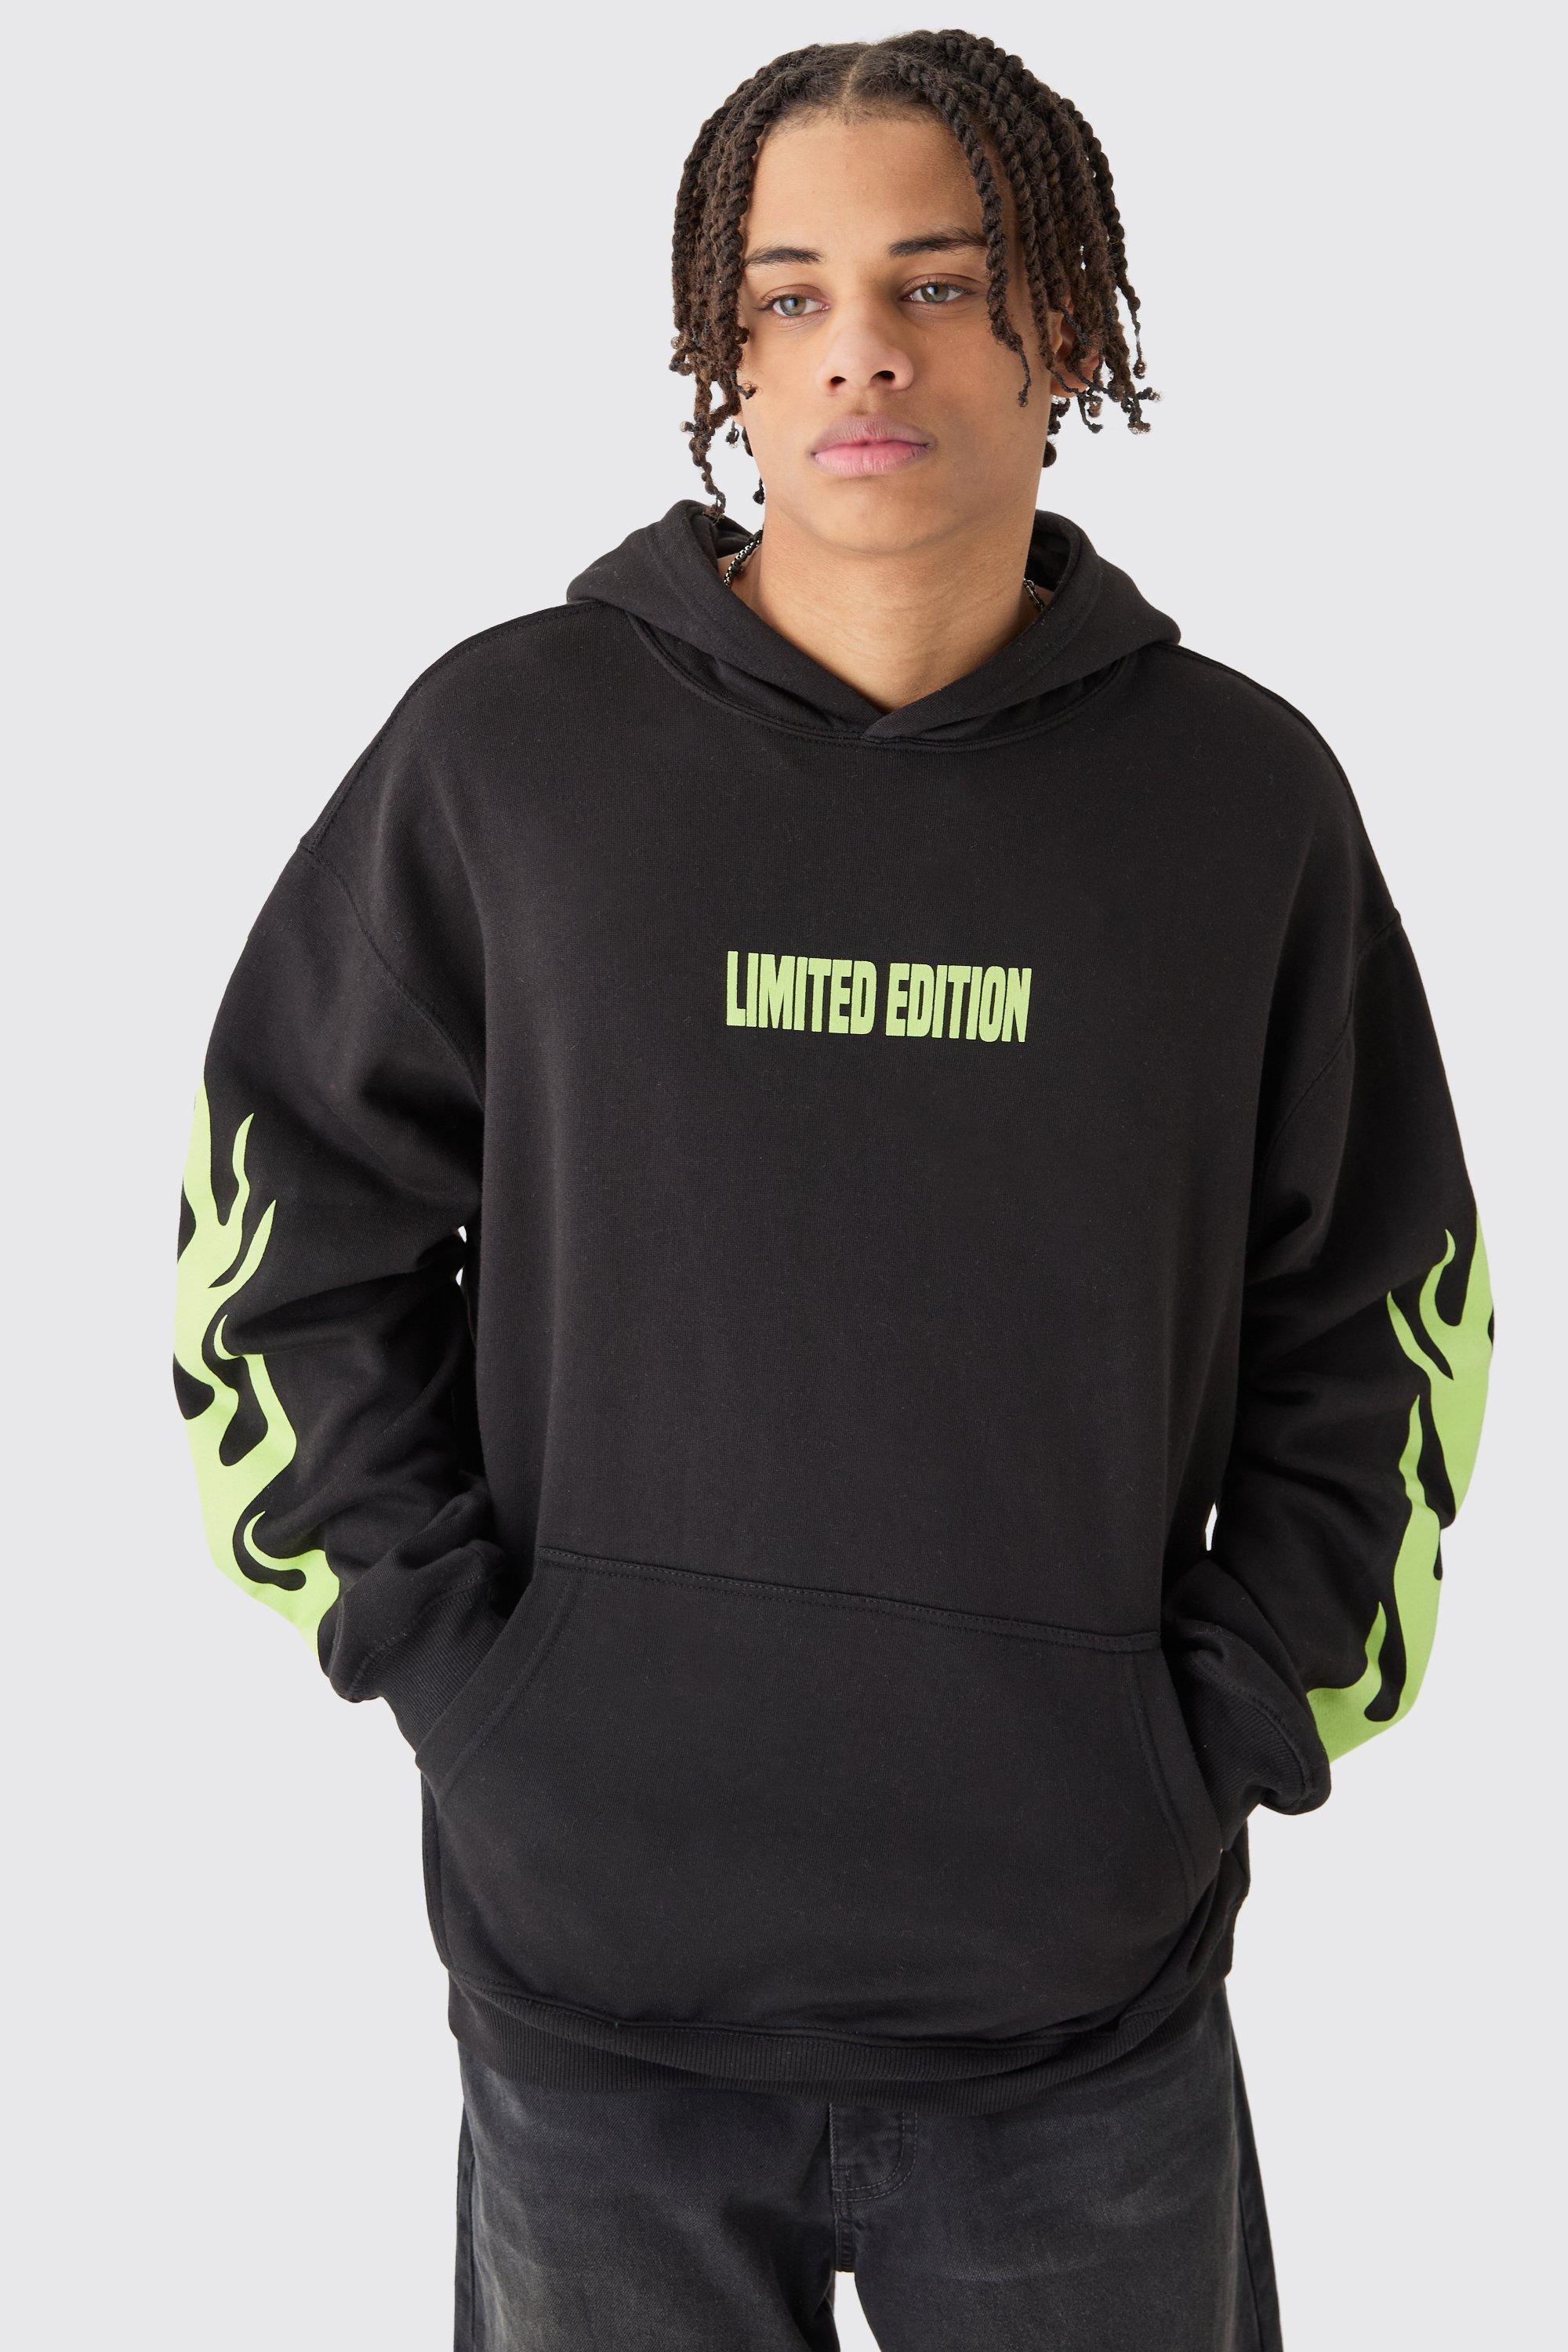 Mens Black Oversized Limited Edition Flame Hoodie, Black